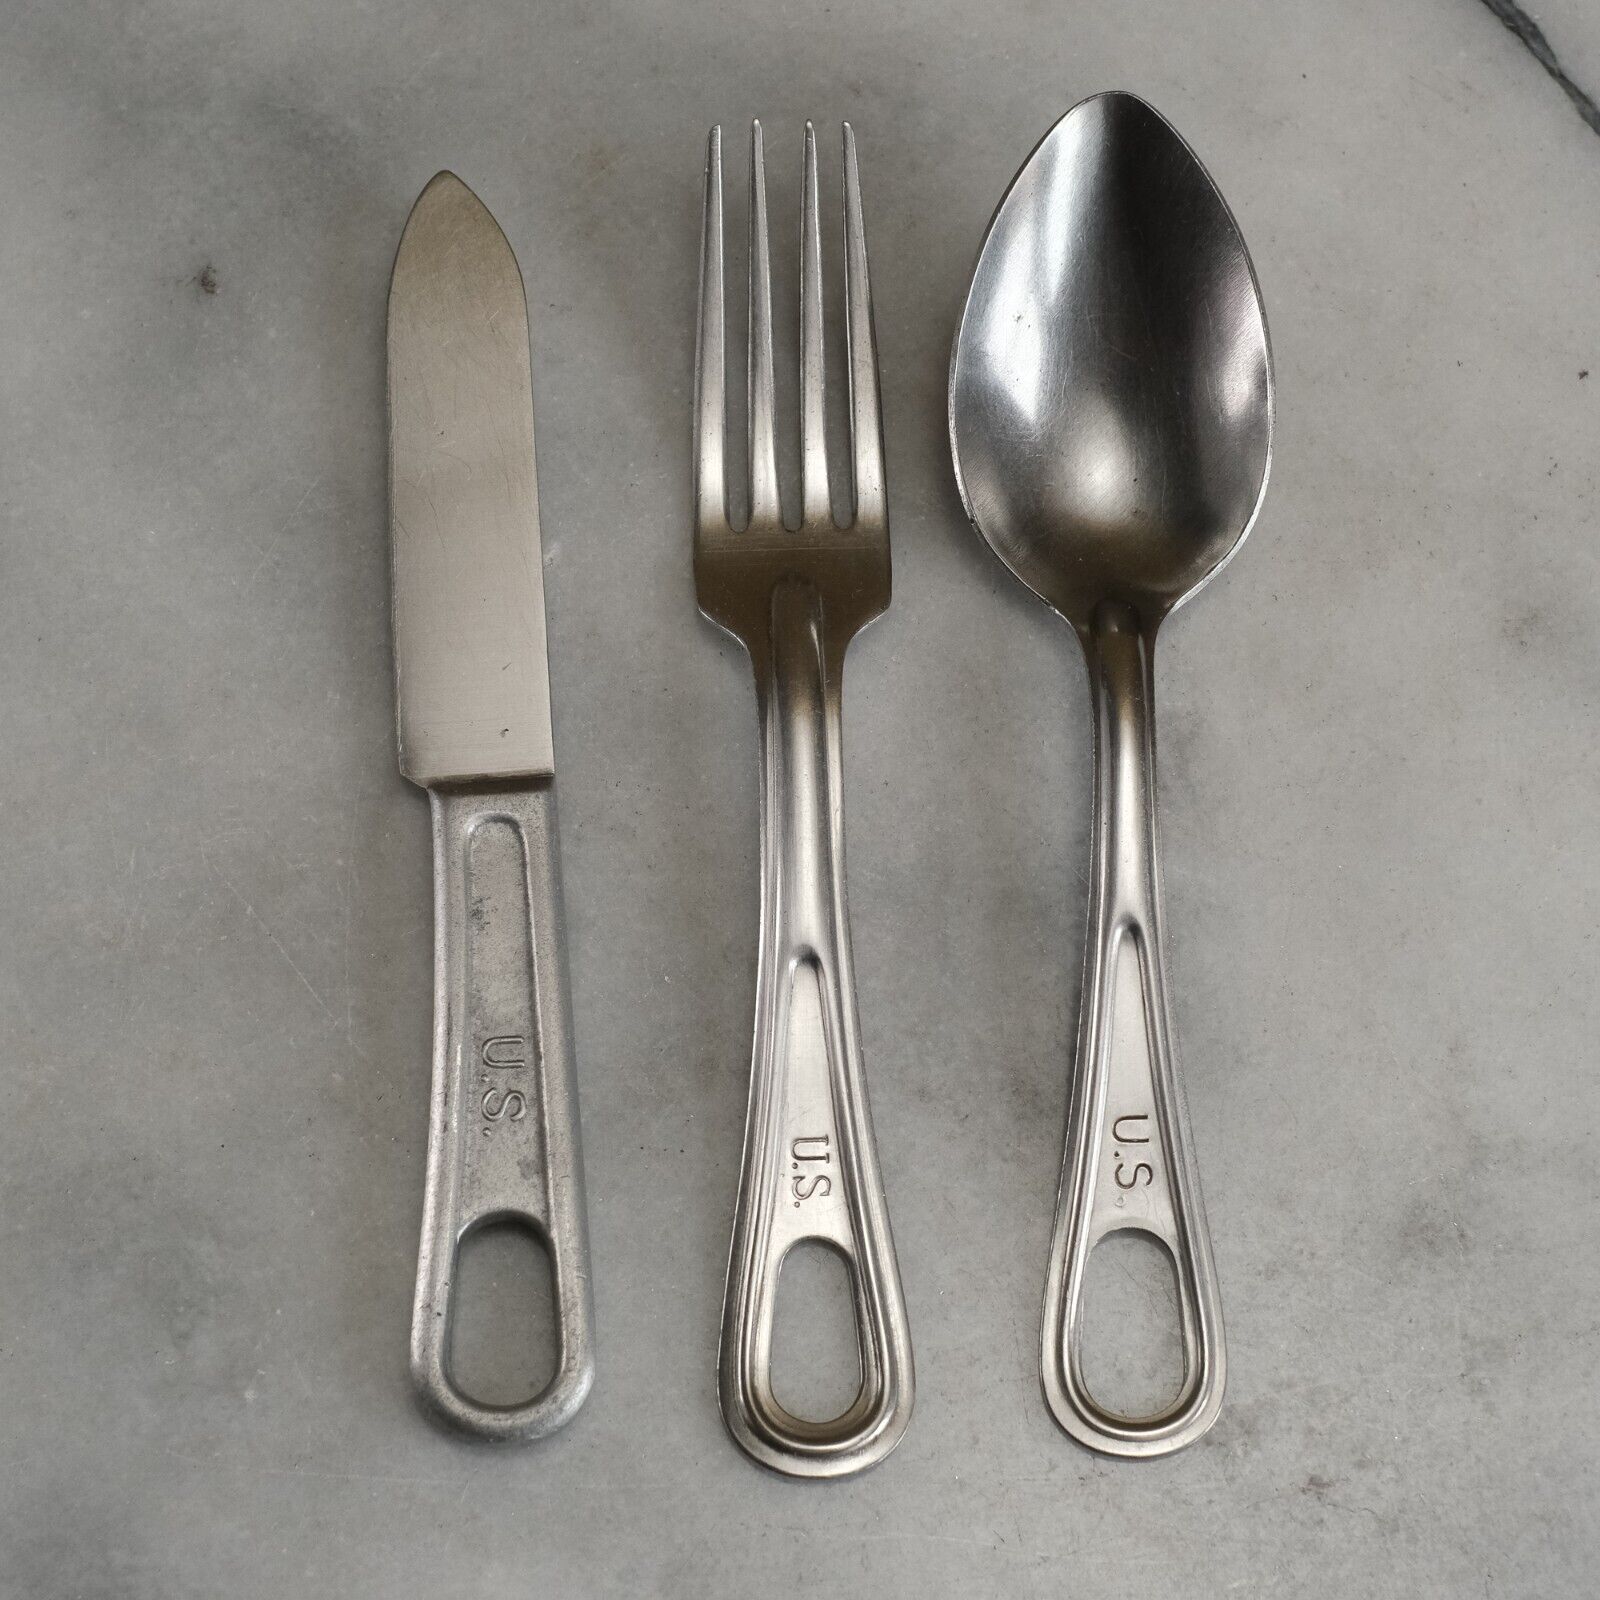 US MILITARY MESS KIT Silverware Set - Knife, Fork and Spoon Vintage